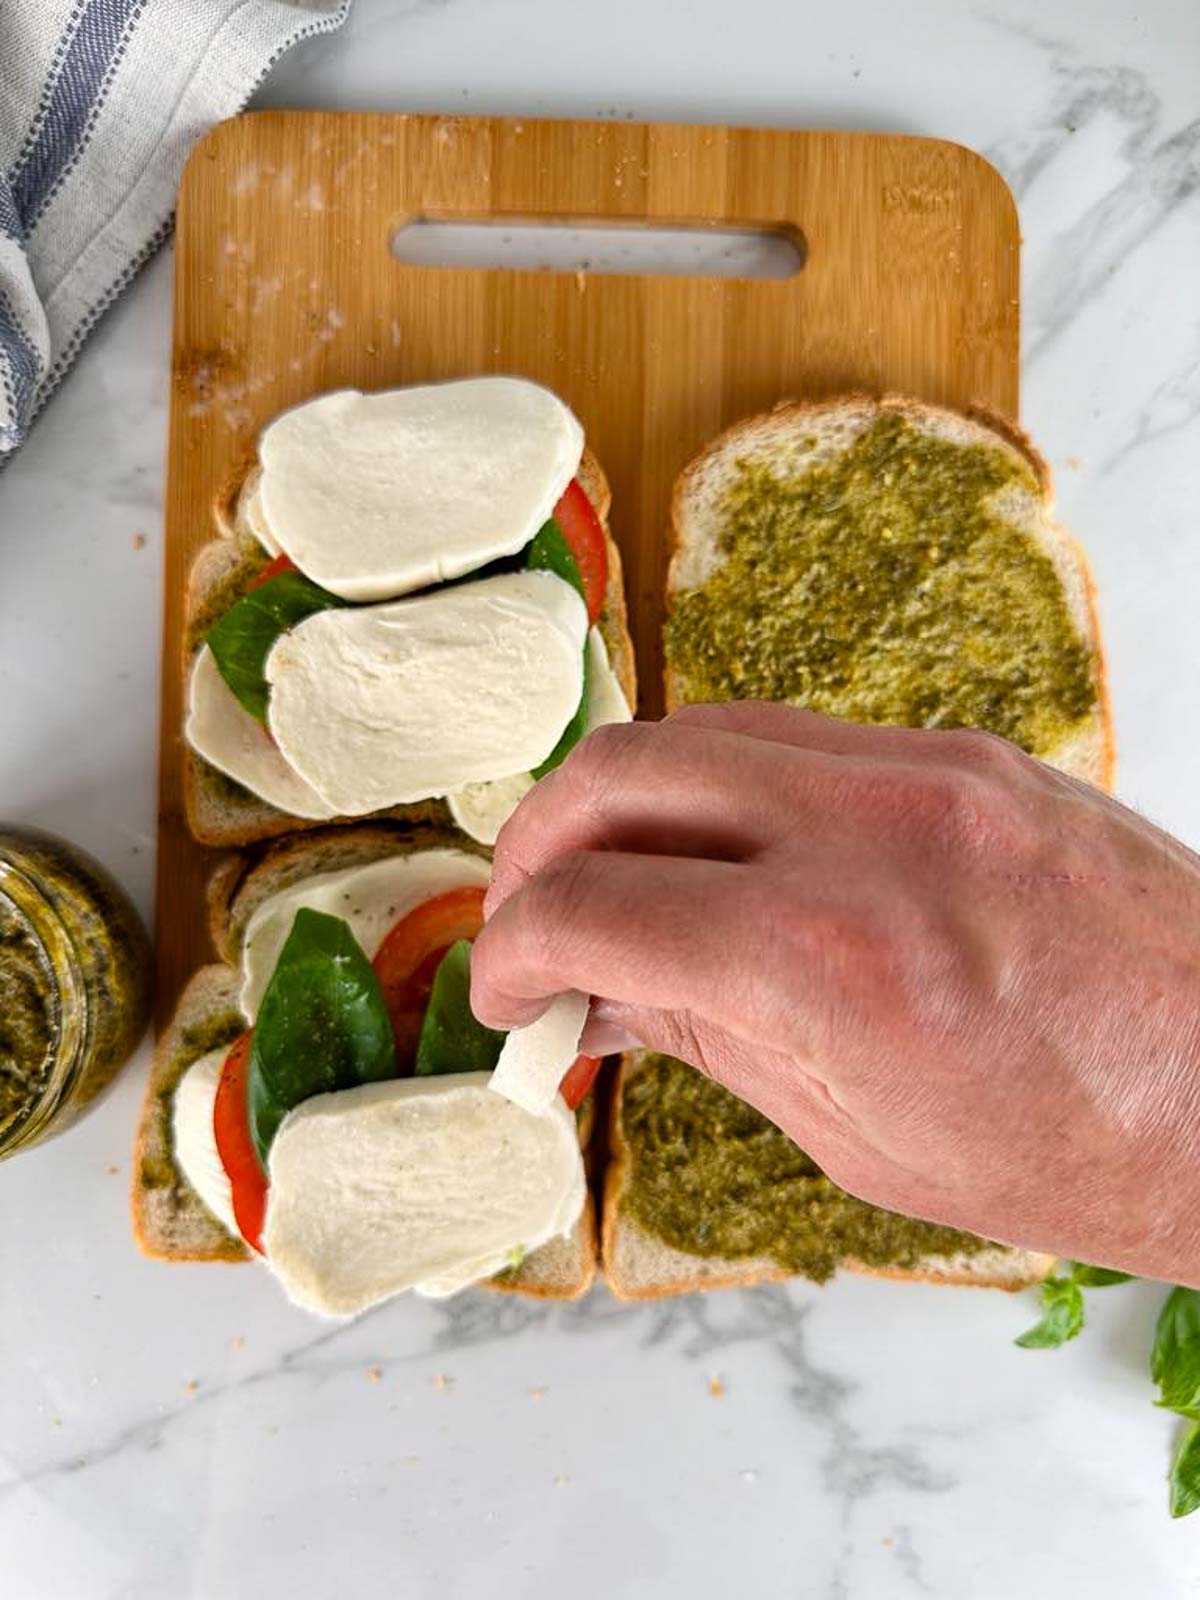 Build the caprese panini sandwich with pesto by layering mozzarella, tomatoes, and basil on sliced of bread slathered with pesto.